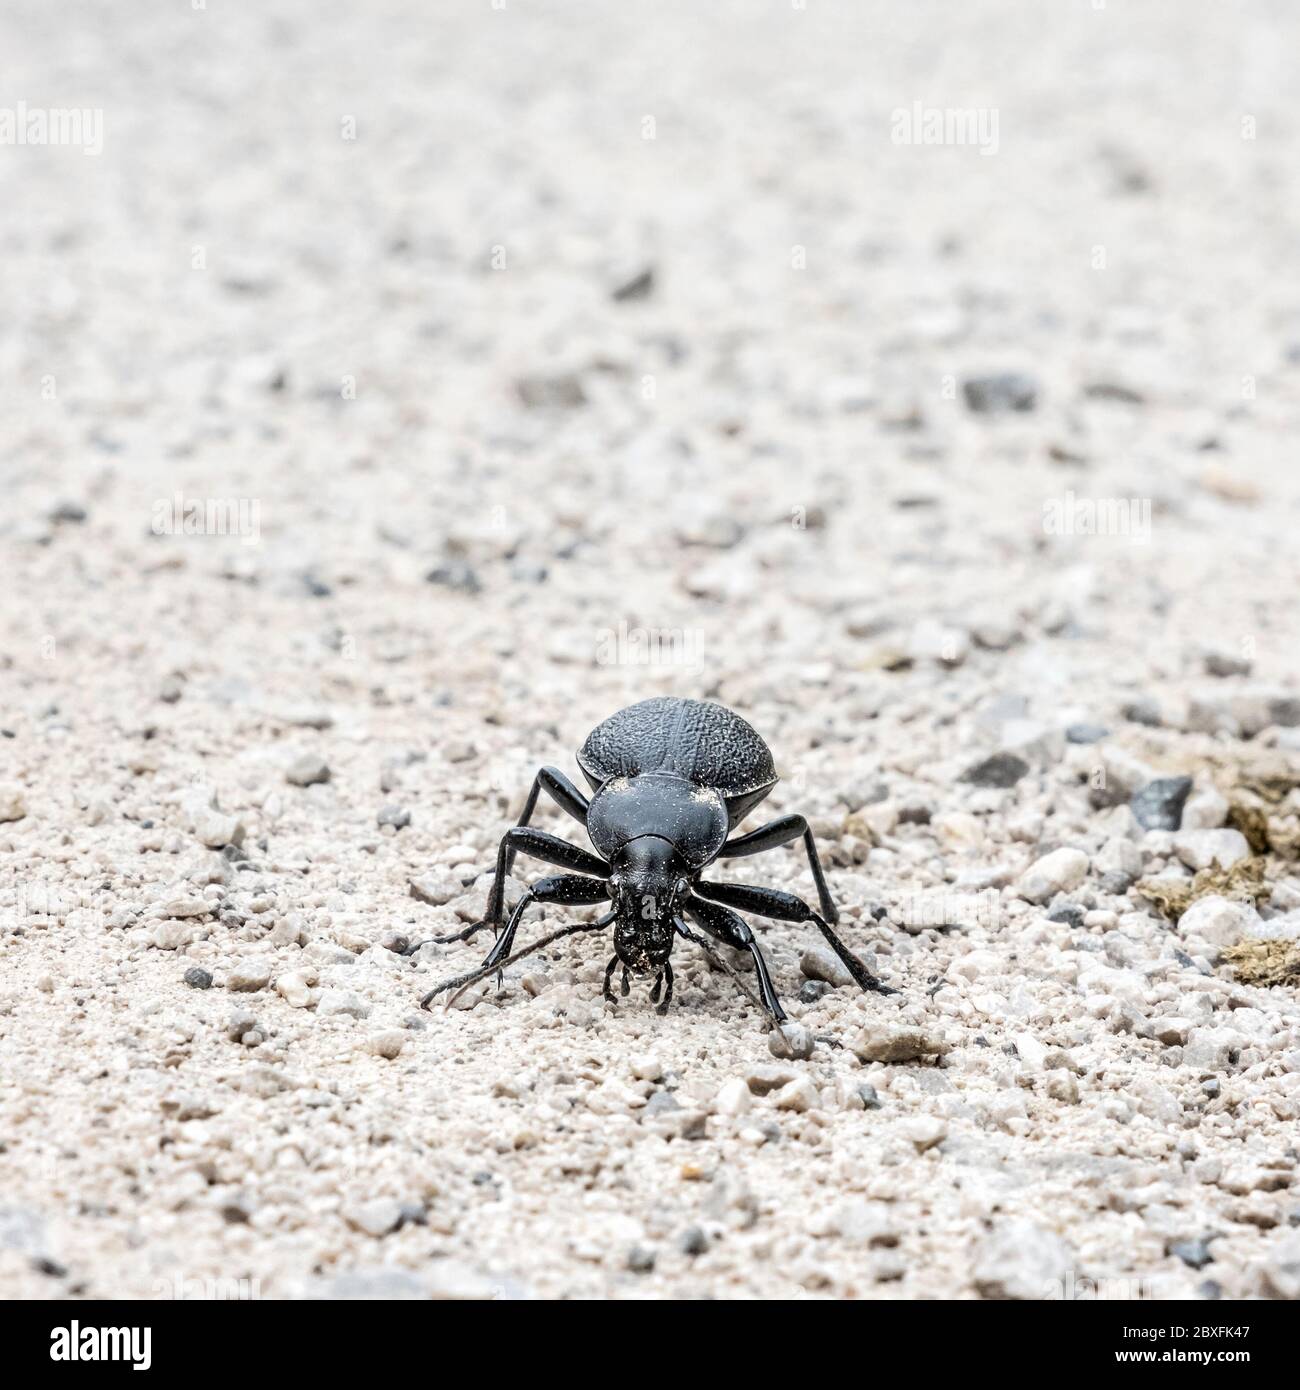 Detail photo of Black coloured ground beetle - Carabus variolosus. Beauty in nature. Stock Photo